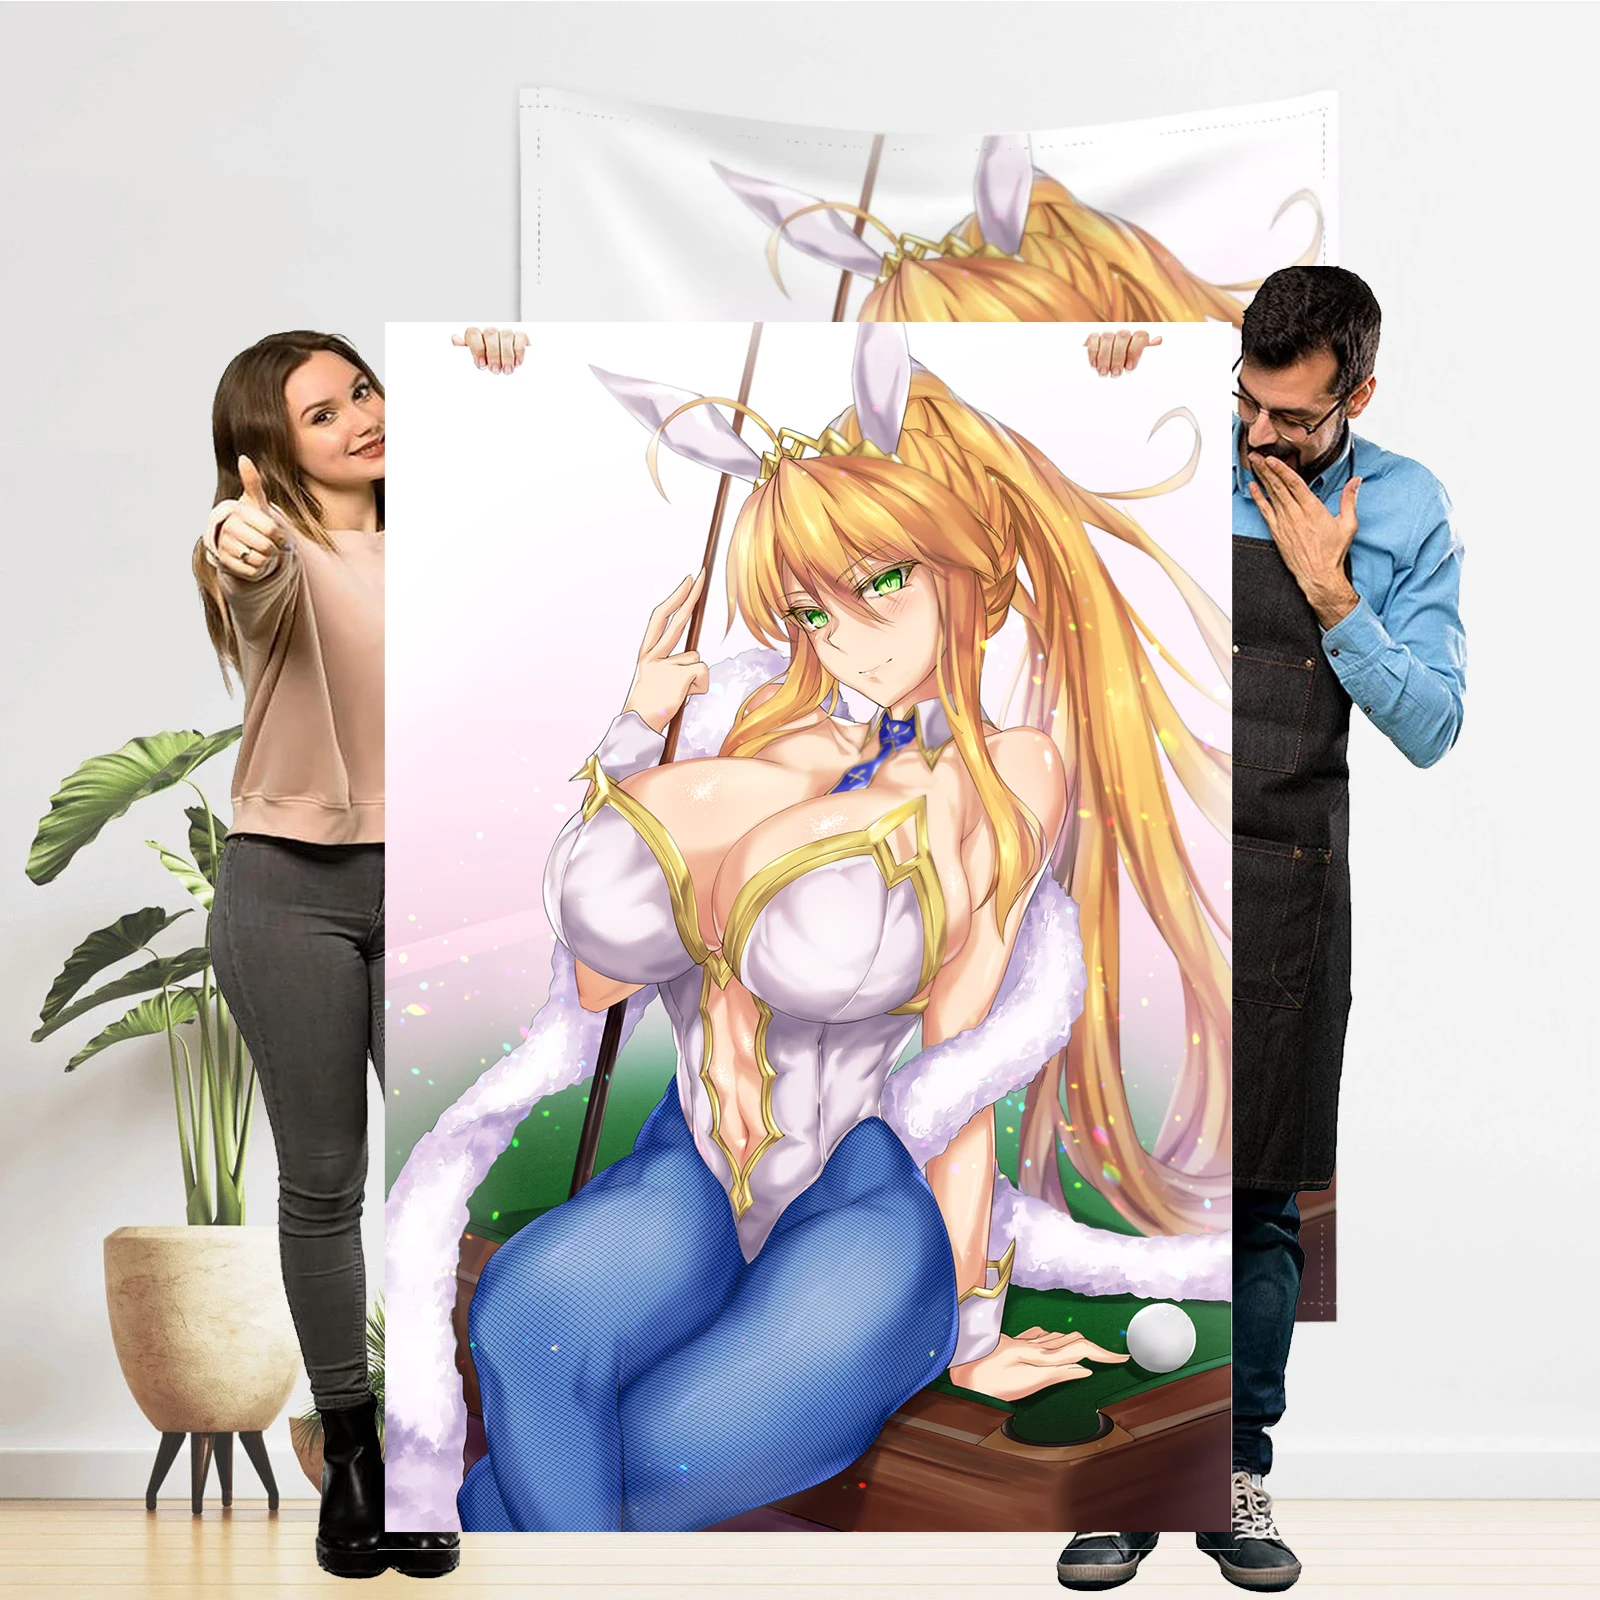 

Fate Grand Order Tapestry Hentai Anime Altria Poster Wall Hanging Artist CG Tapestries Sexy Adult Tapestrys H Doujinshi Tapestr